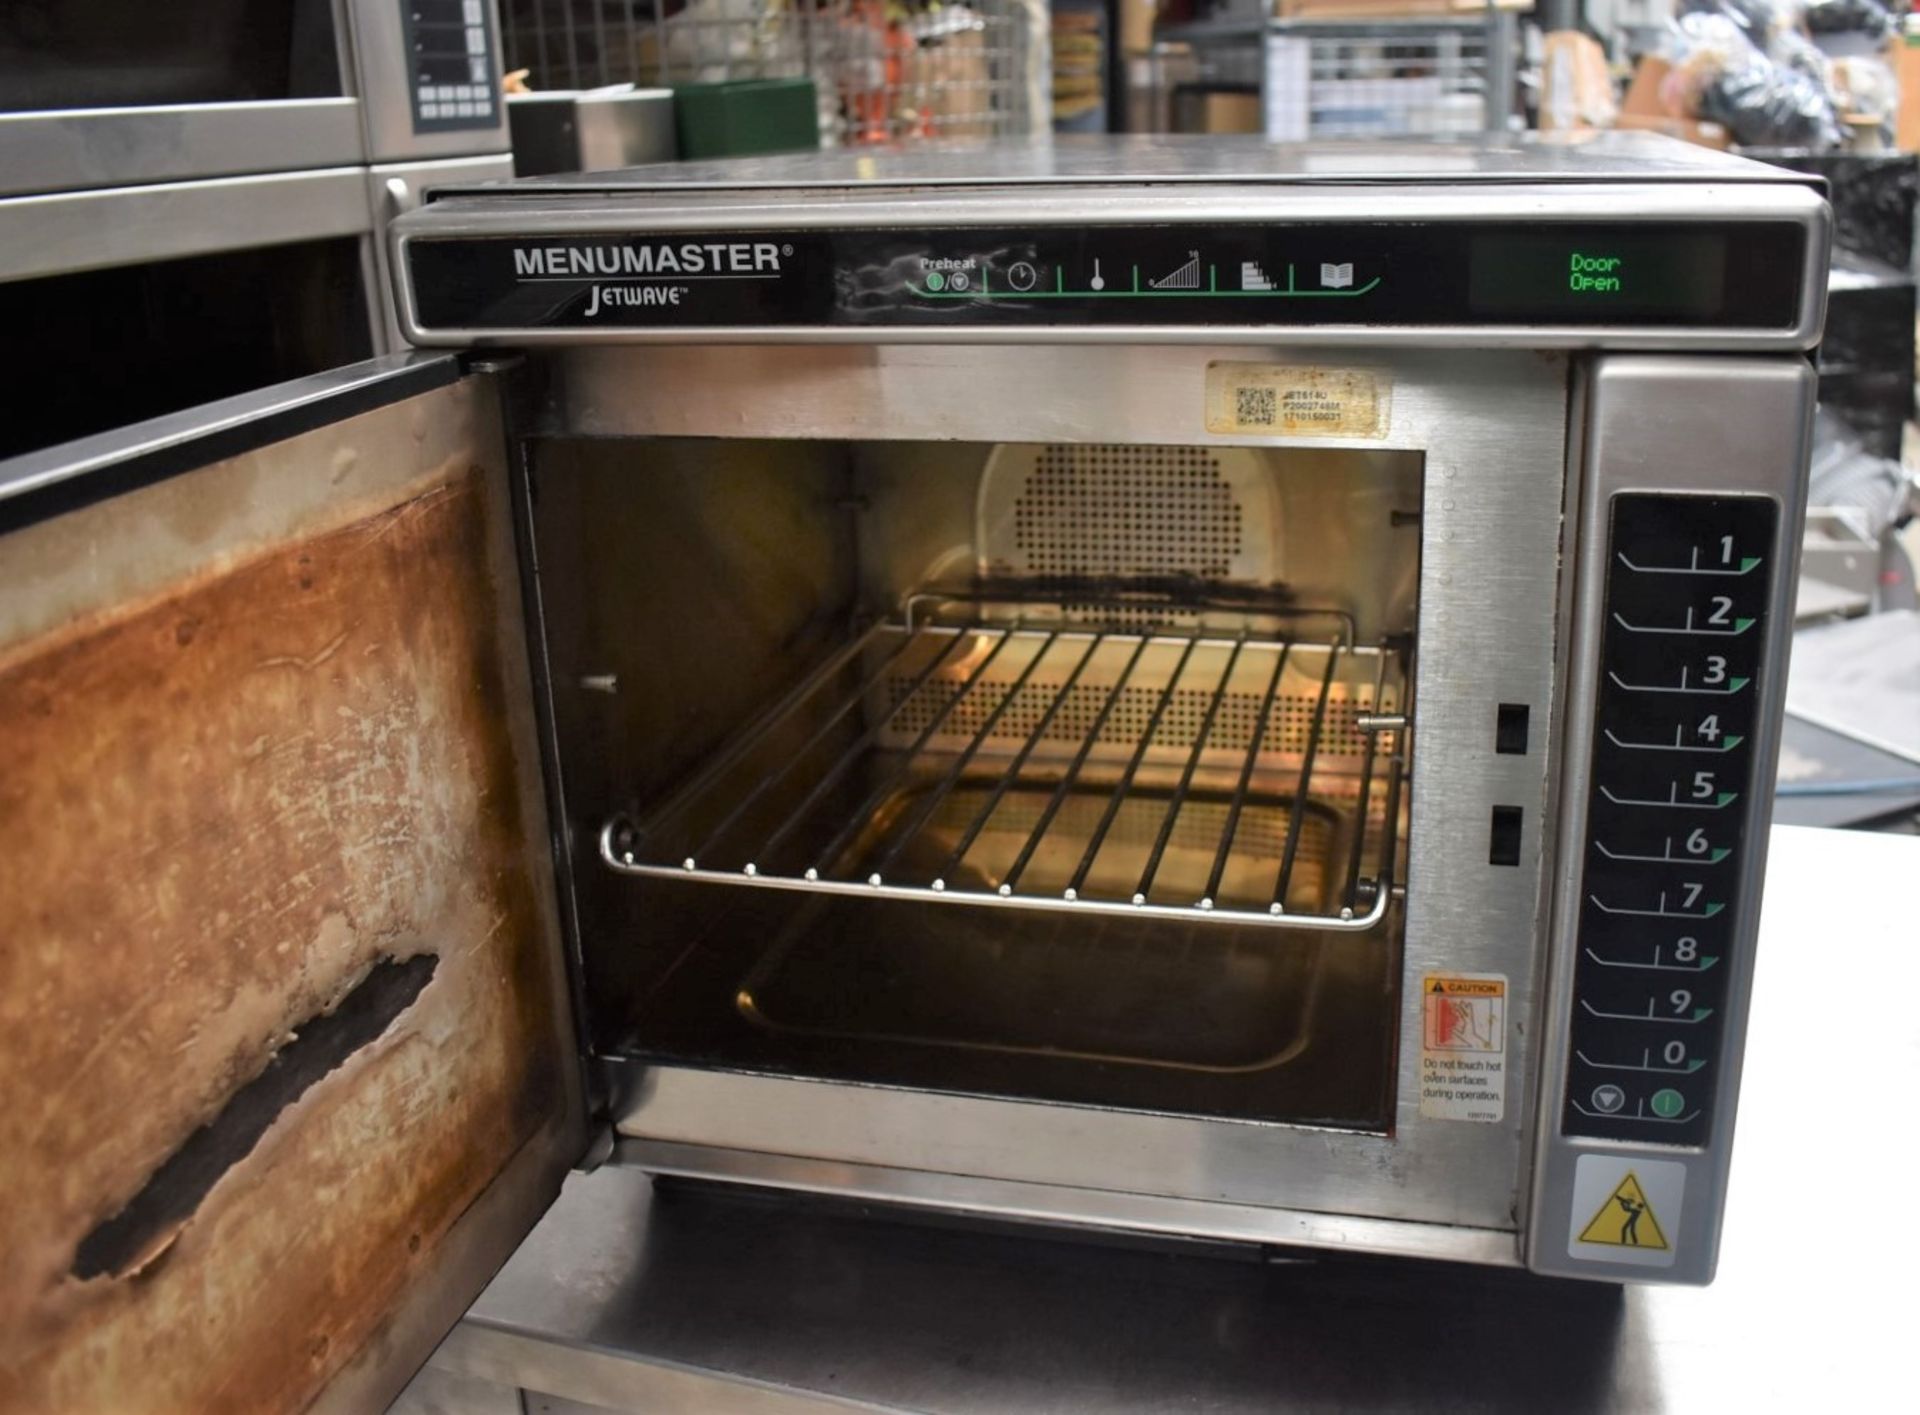 1 x Menumaster Jetwave JET514U High Speed Combination Microwave Oven - RRP £2,400 - Manufacture - Image 2 of 11